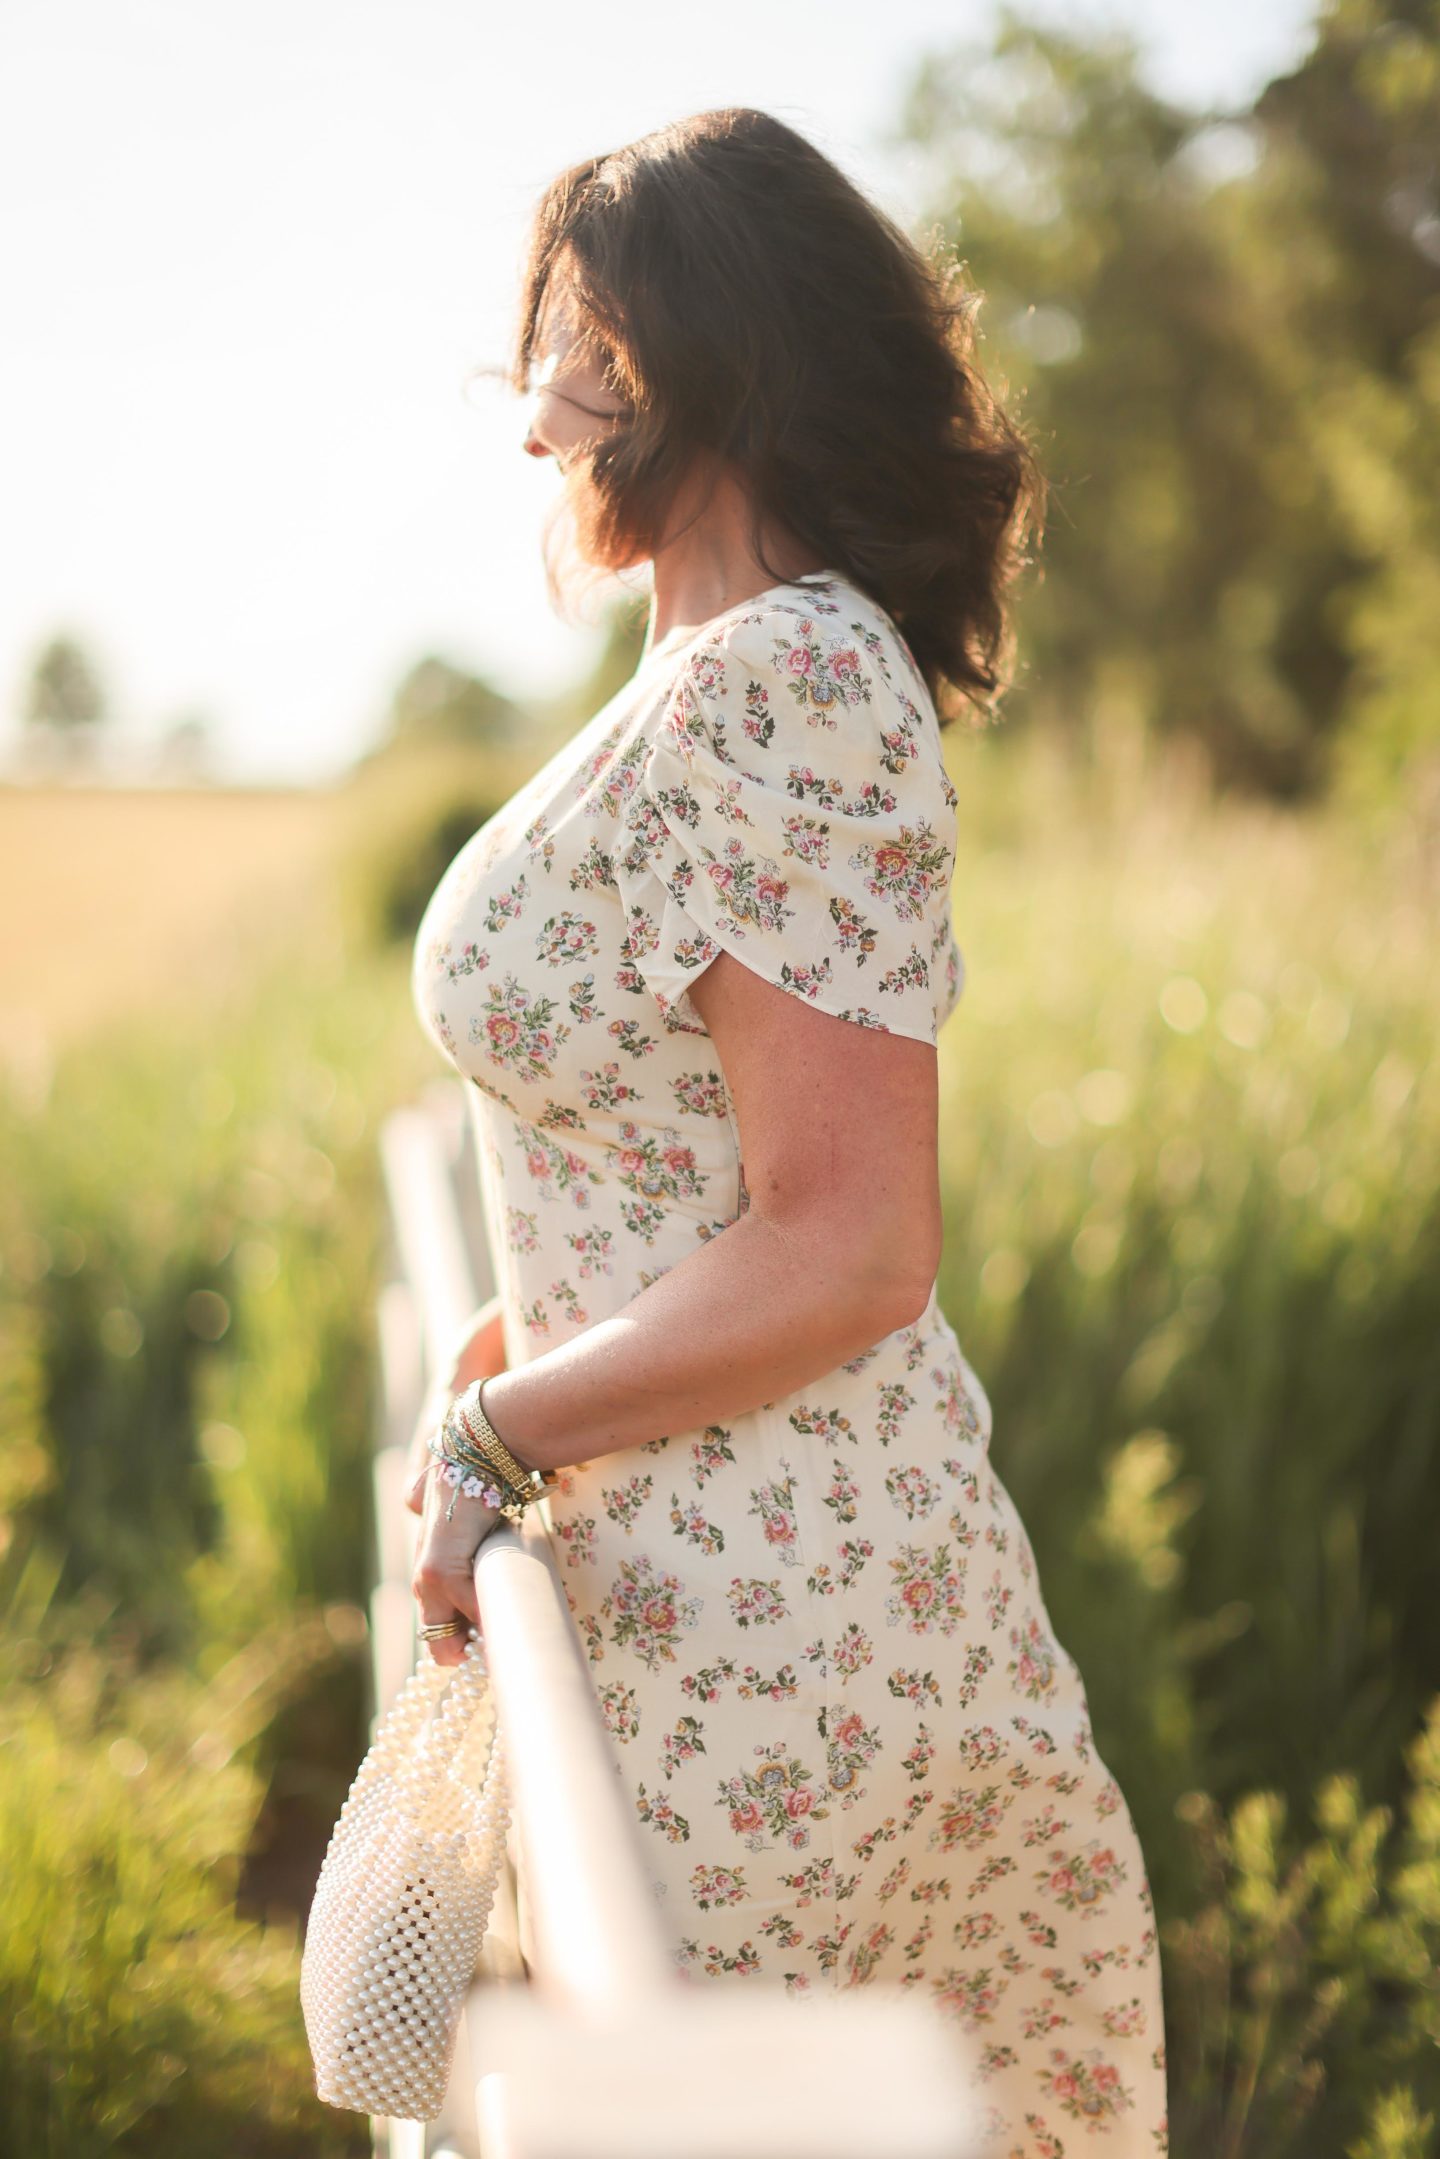 Christina stands beside a field of long grass wearing a summer dress looking away from camera as the sun sets.